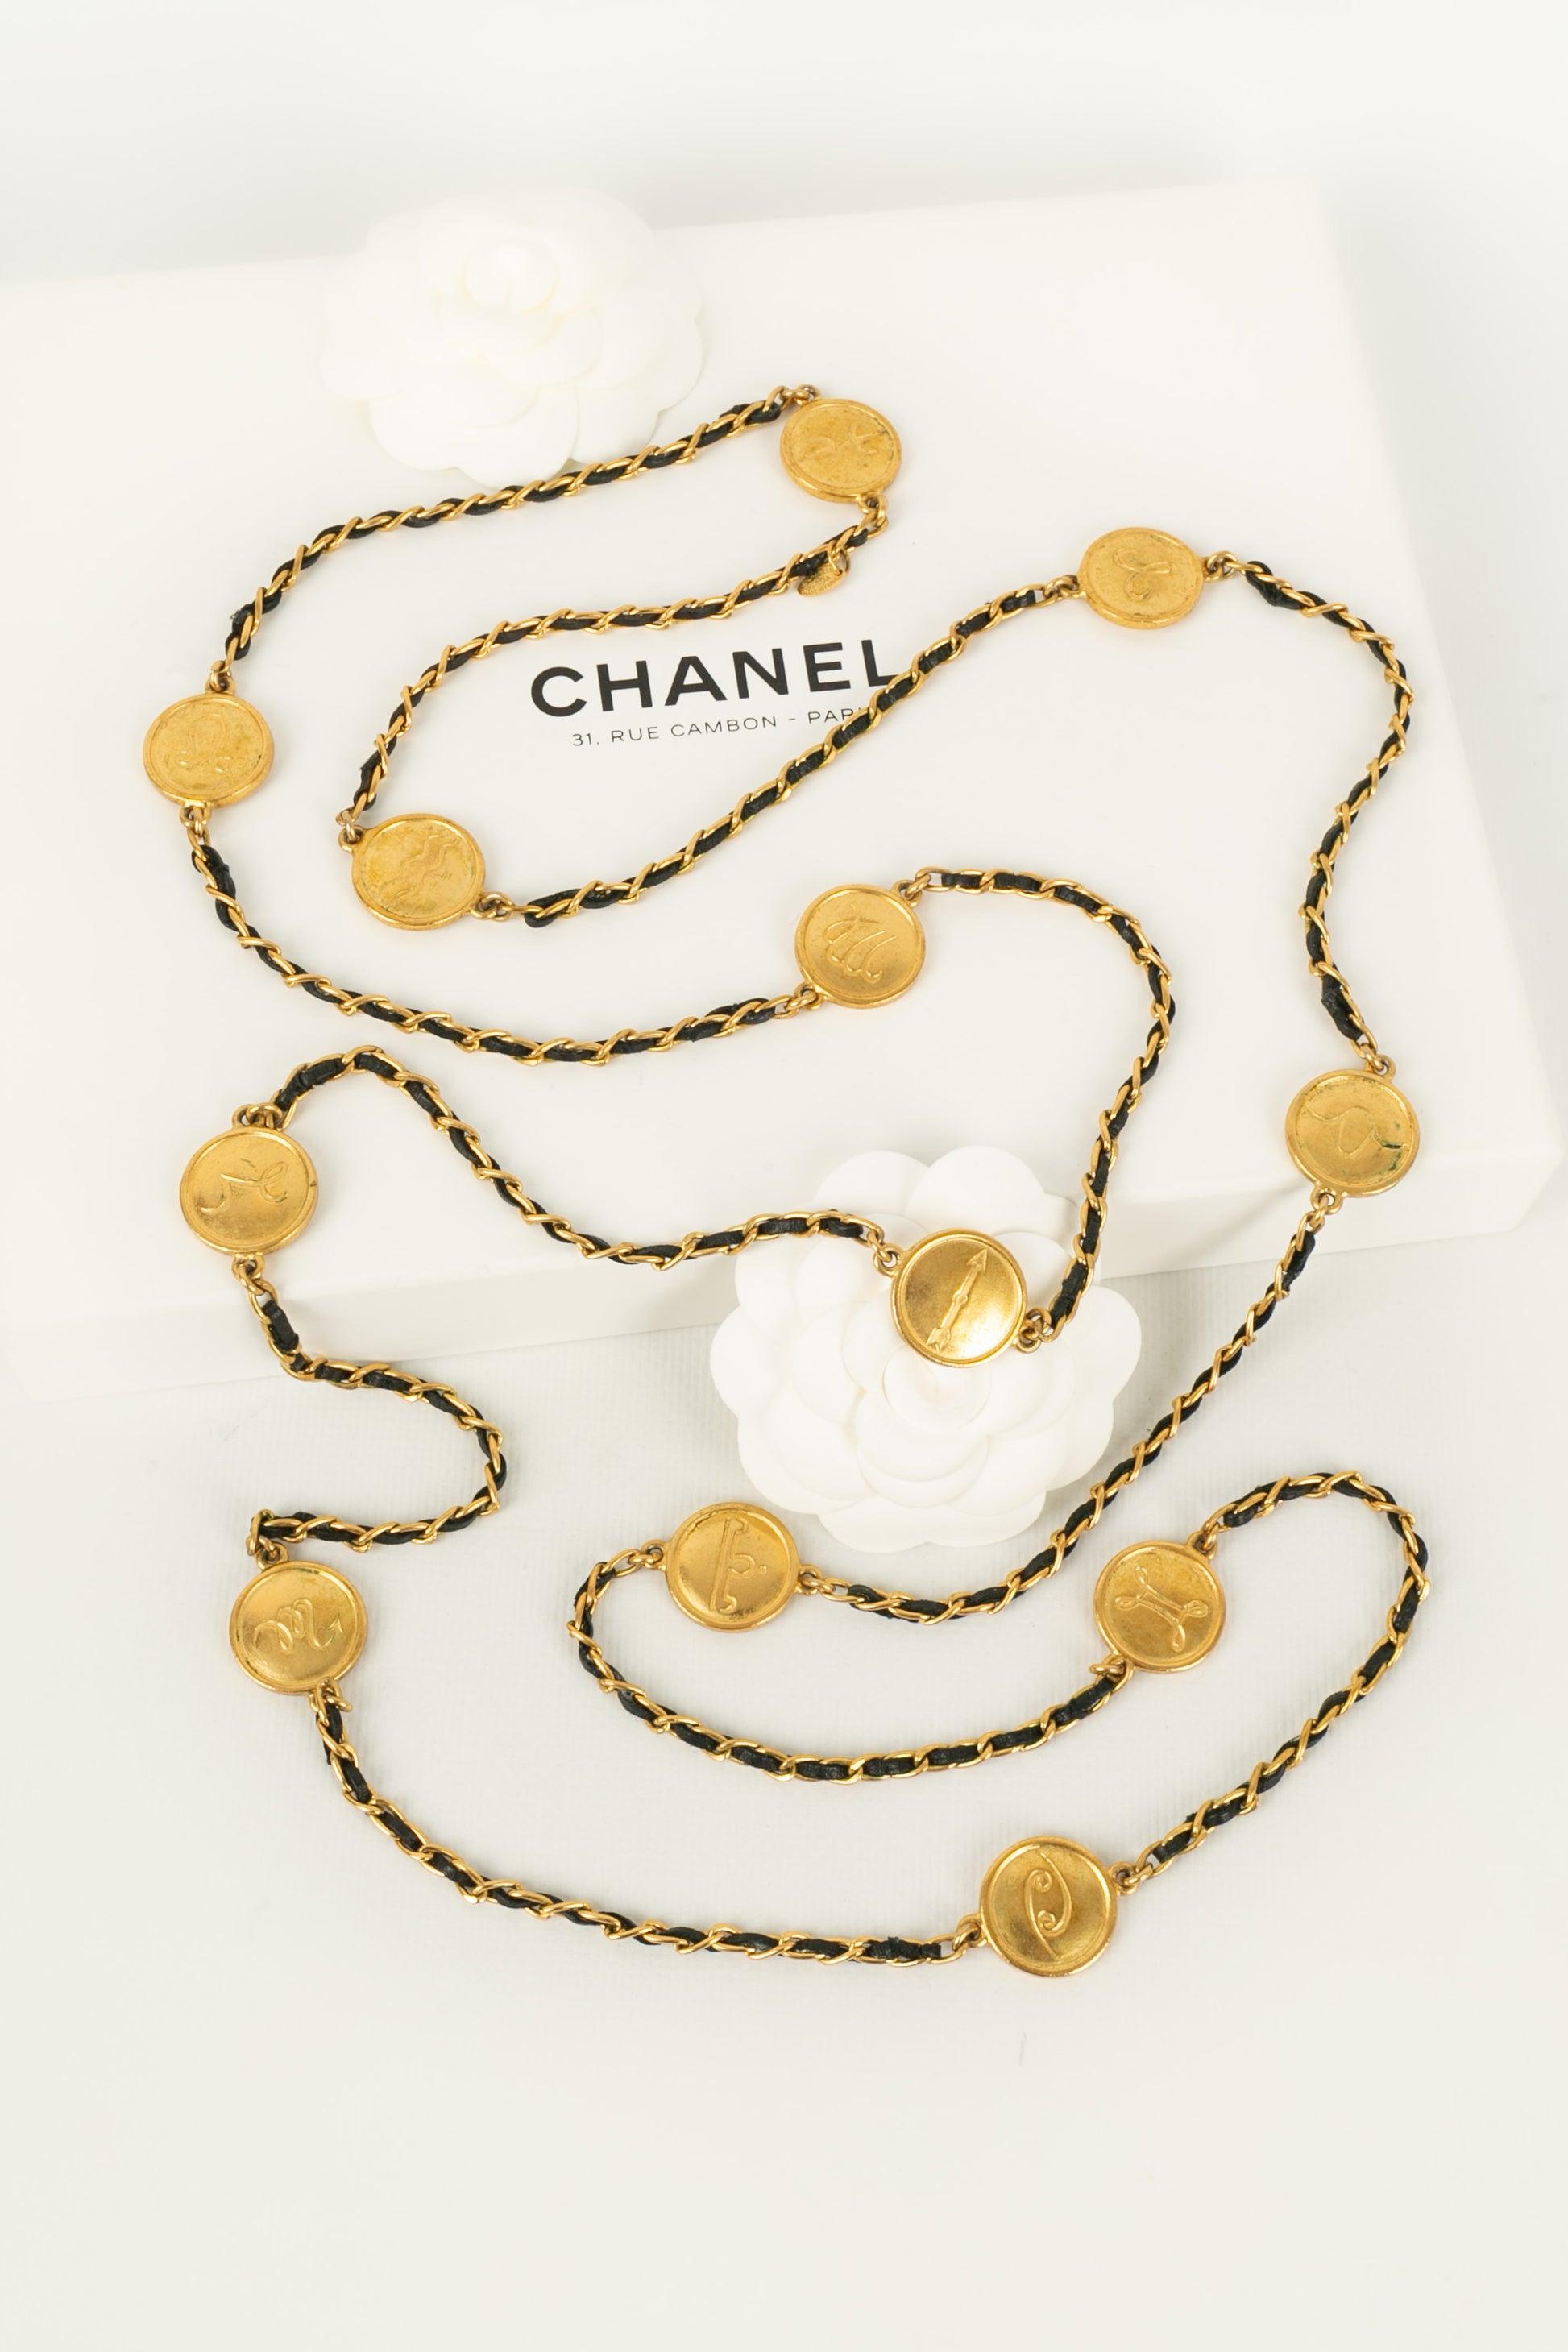 Chanel Necklace / Sautoir in Gold-Plated Metal, 1995 For Sale 6